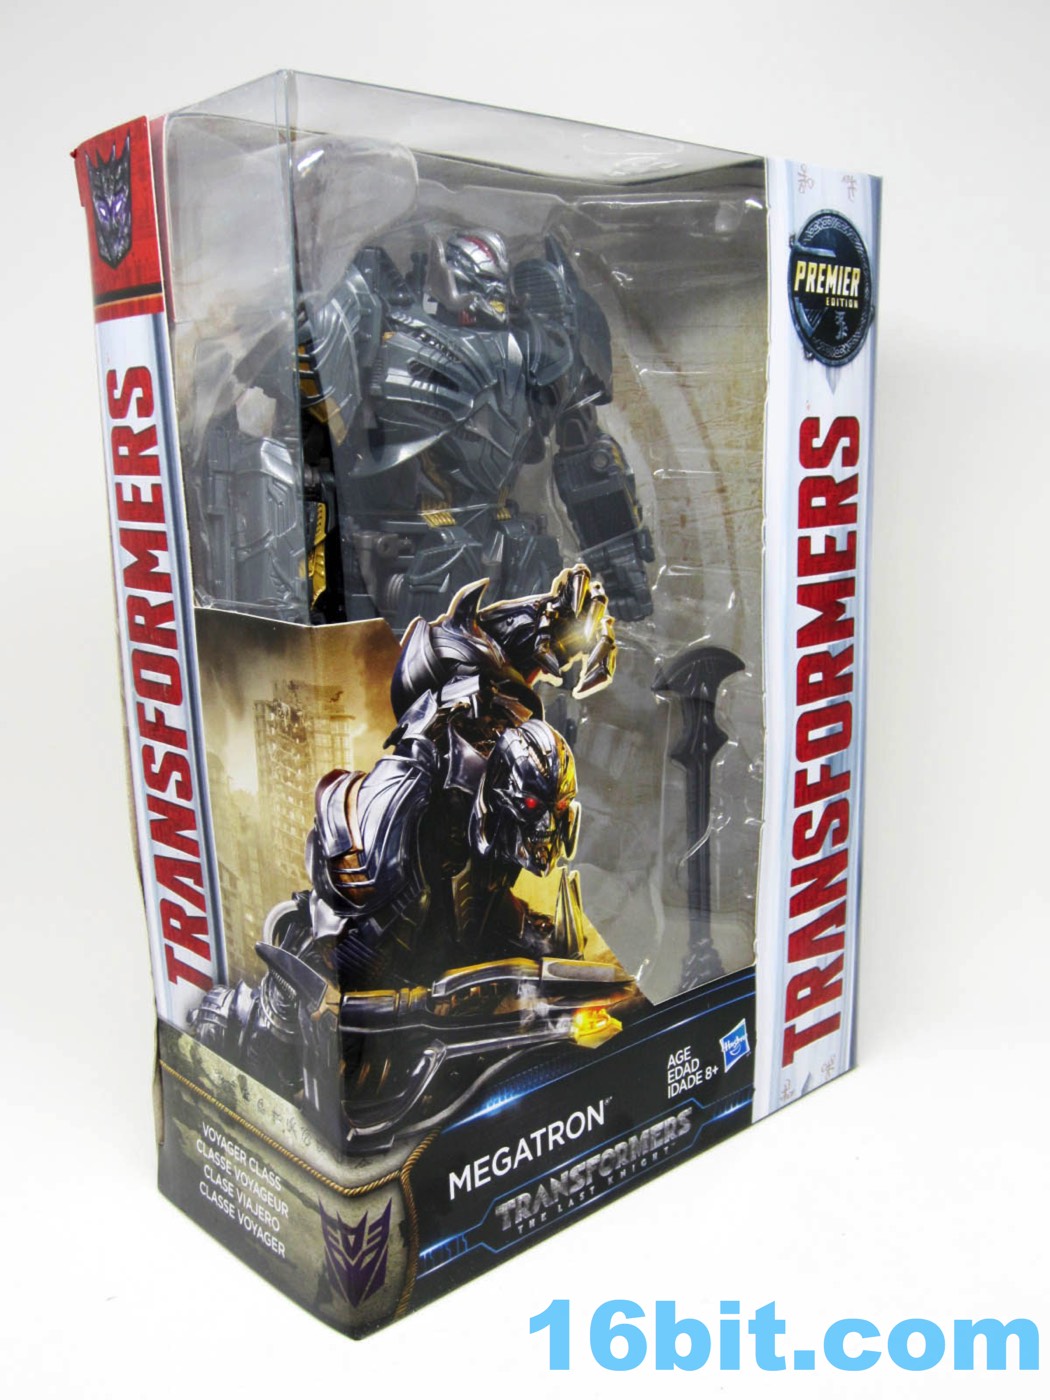 bit.com Figure of the Day Review: Hasbro Transformers The Last